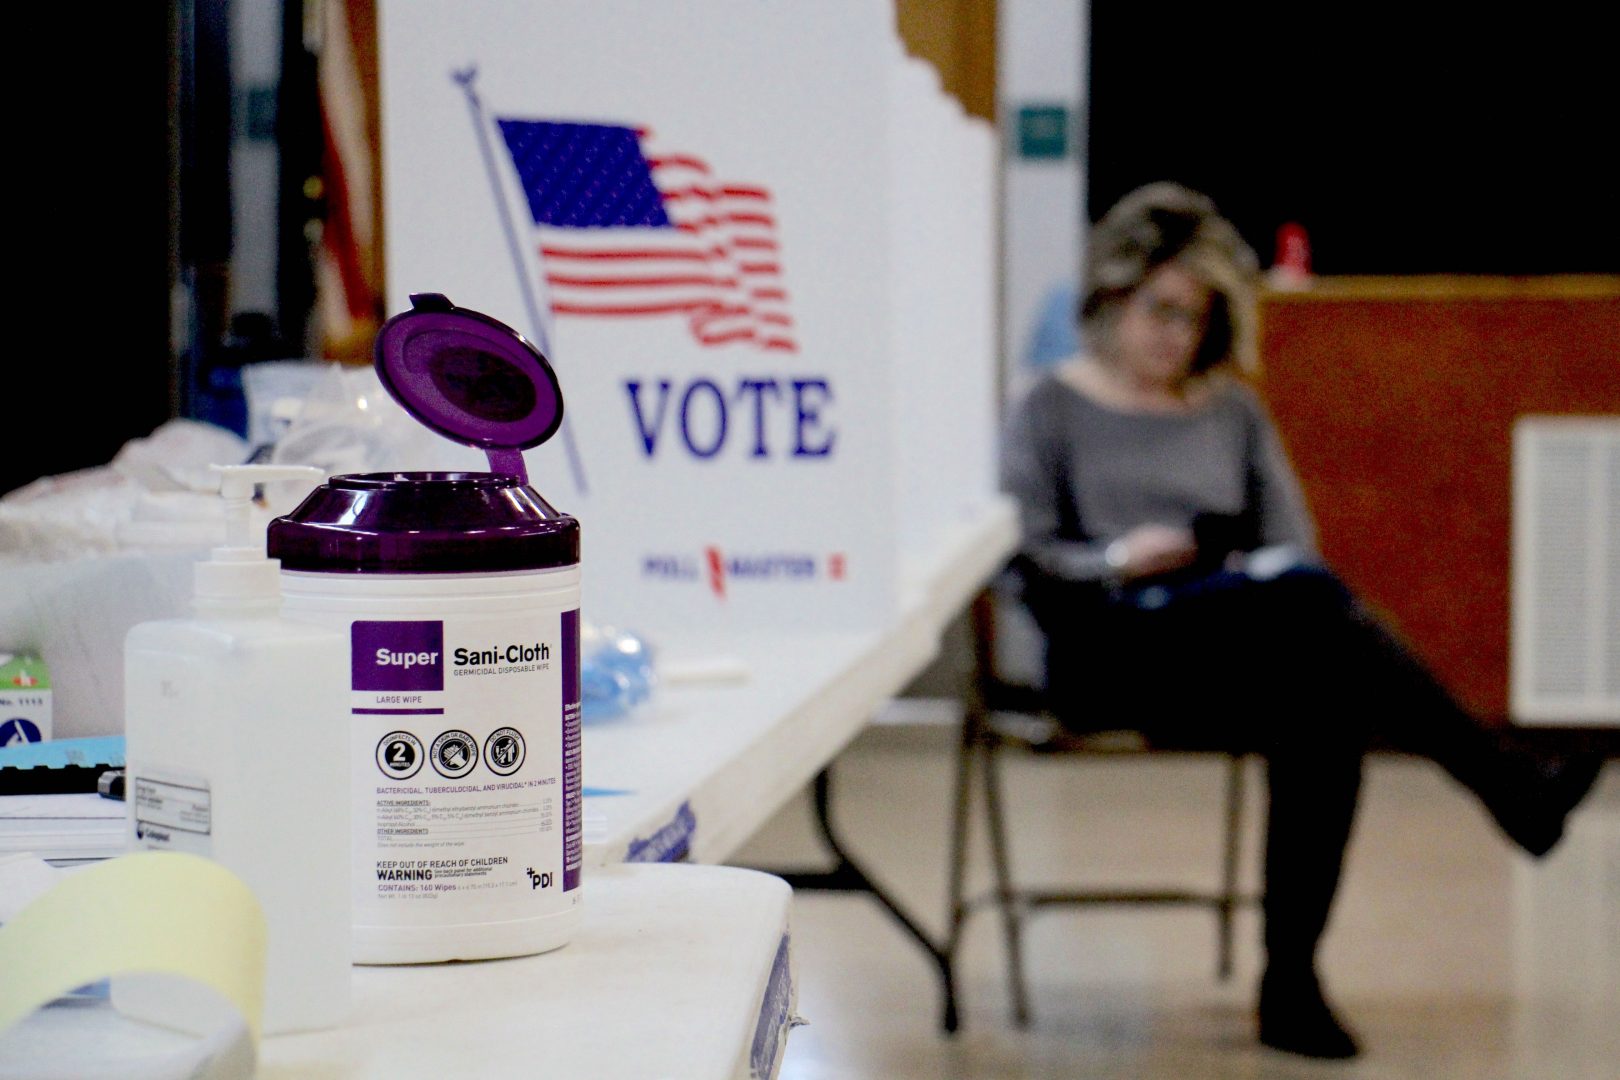 Poll worker Dina Sebold waits for voters at Cecelia Snyder Middle School in Bensalem during a special election for a vacant seat in the Pennsylvania House of Representatives. Hand sanitizer and wipes were made available to voters, many of whom brought their own pens. 